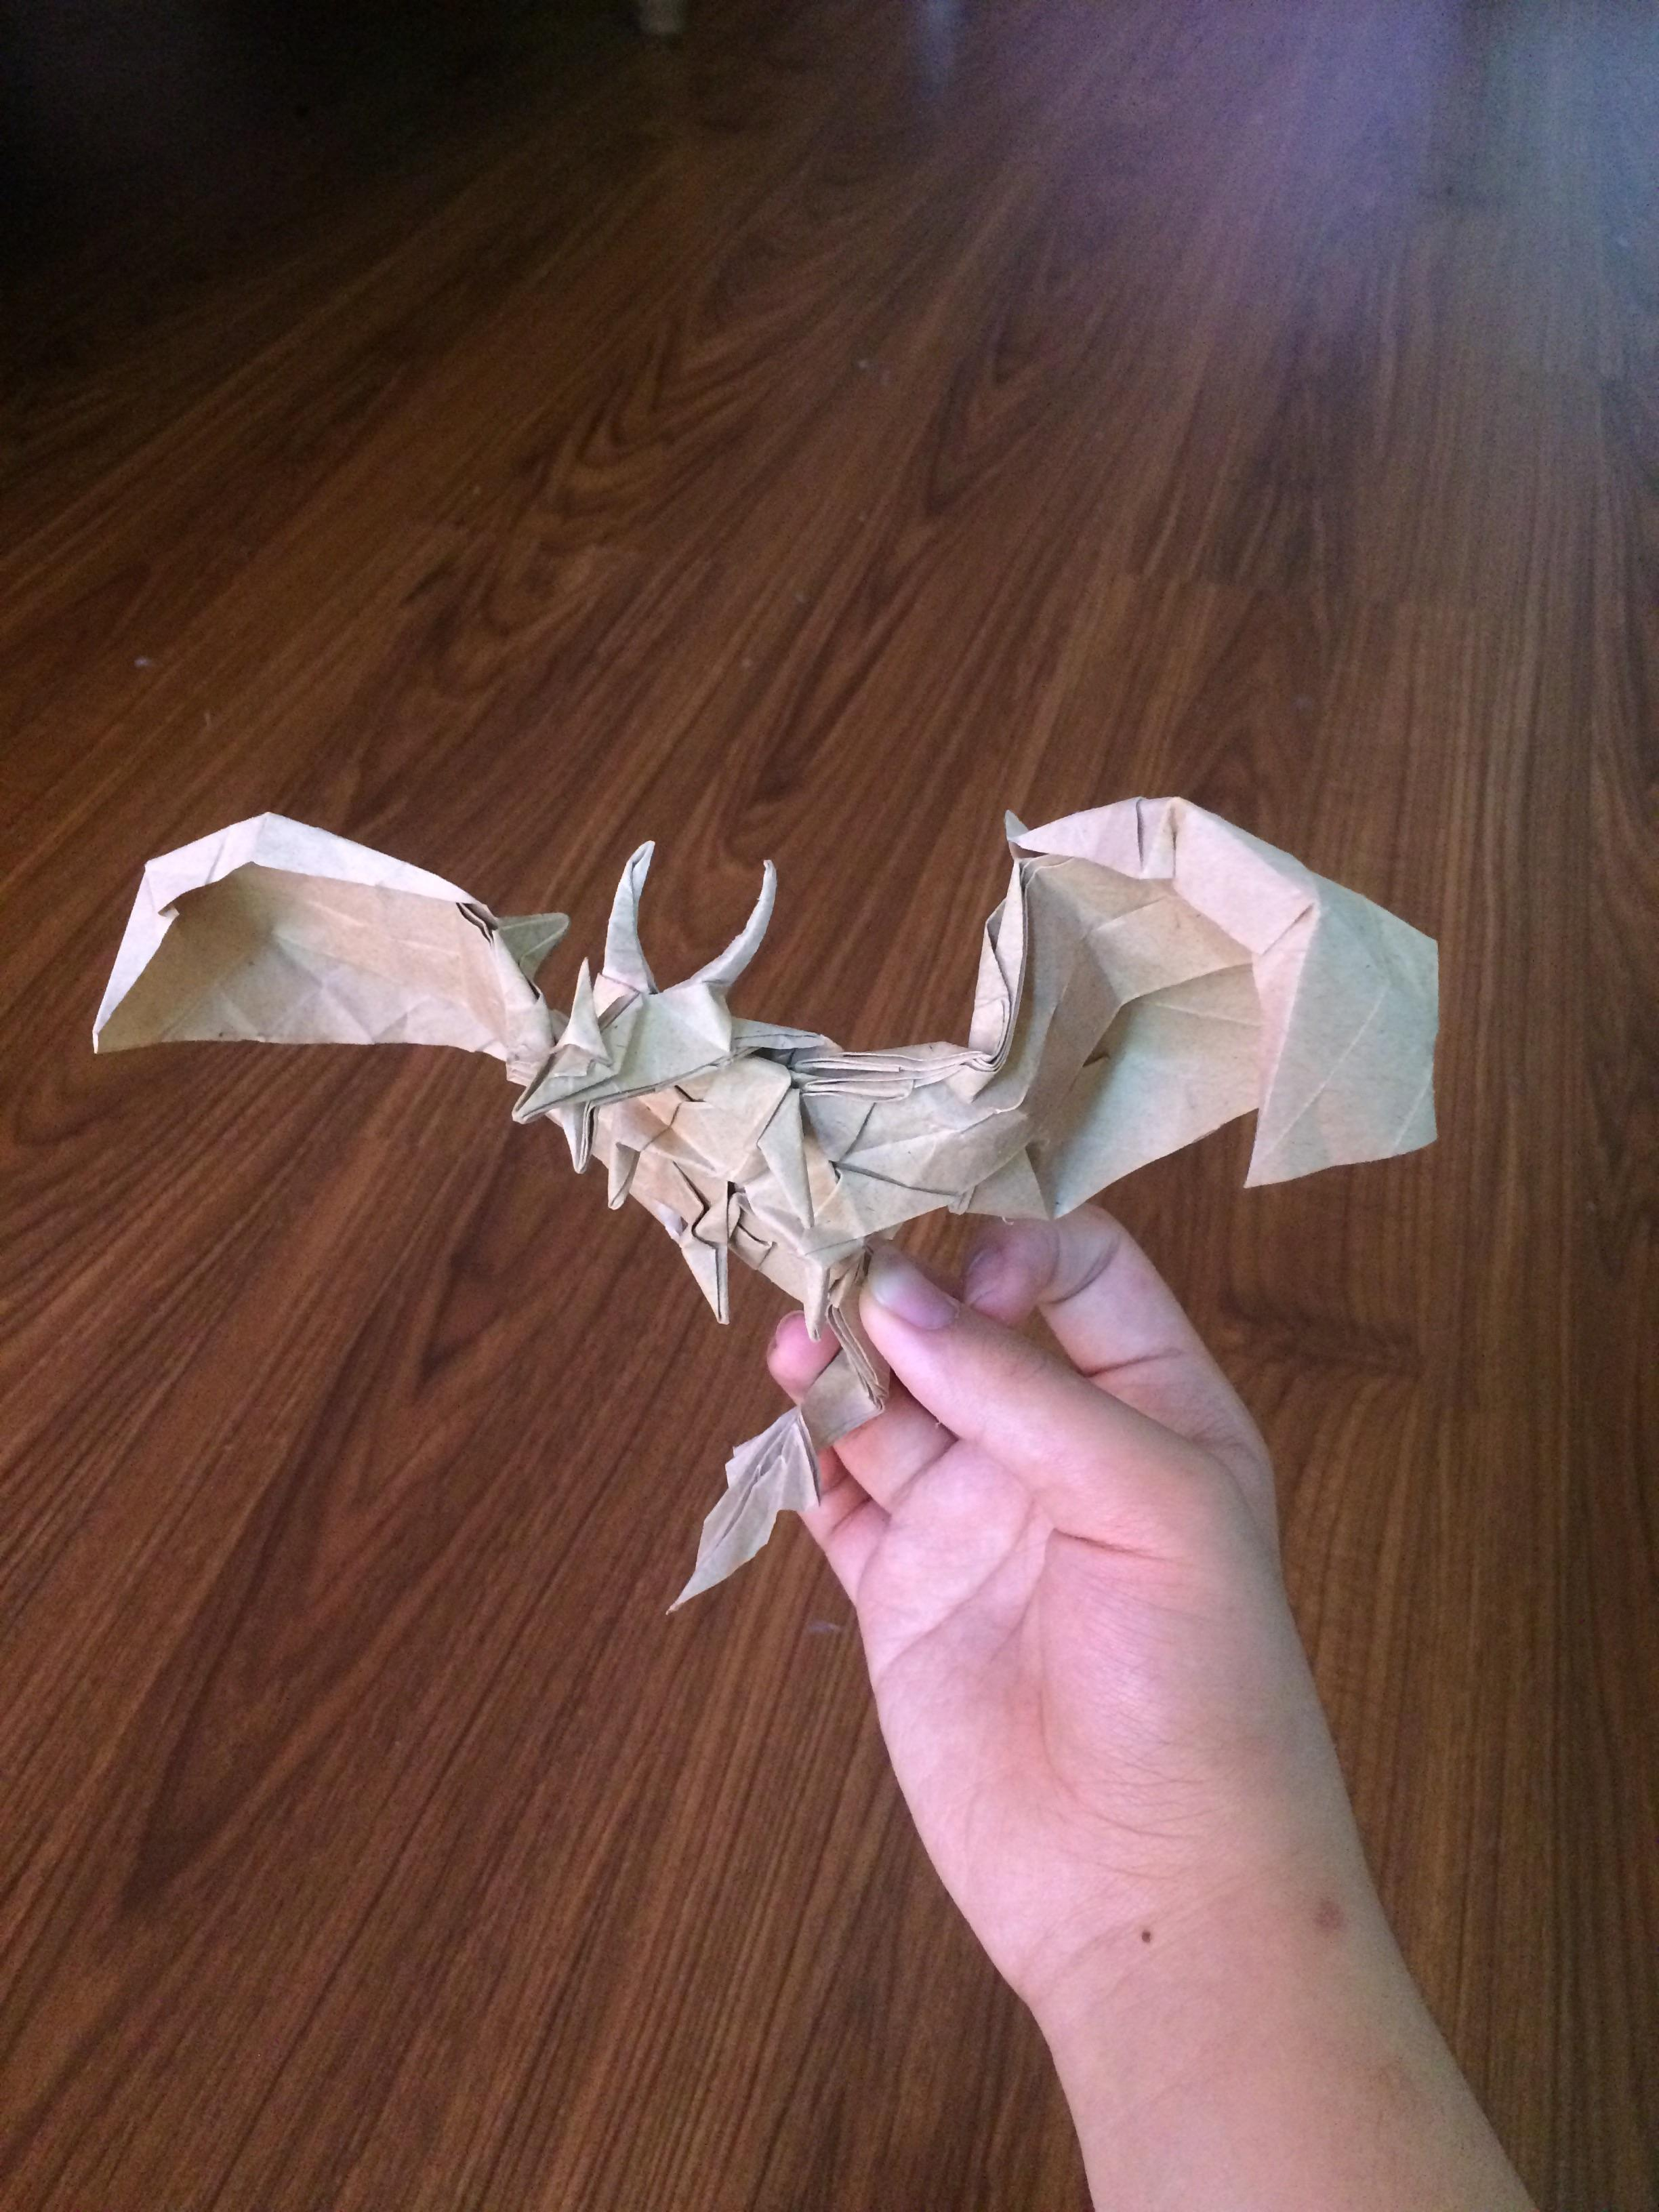 Complex Origami Tutorial An Origami Dragon I Designed When I Was 13 Its Still Remains As The